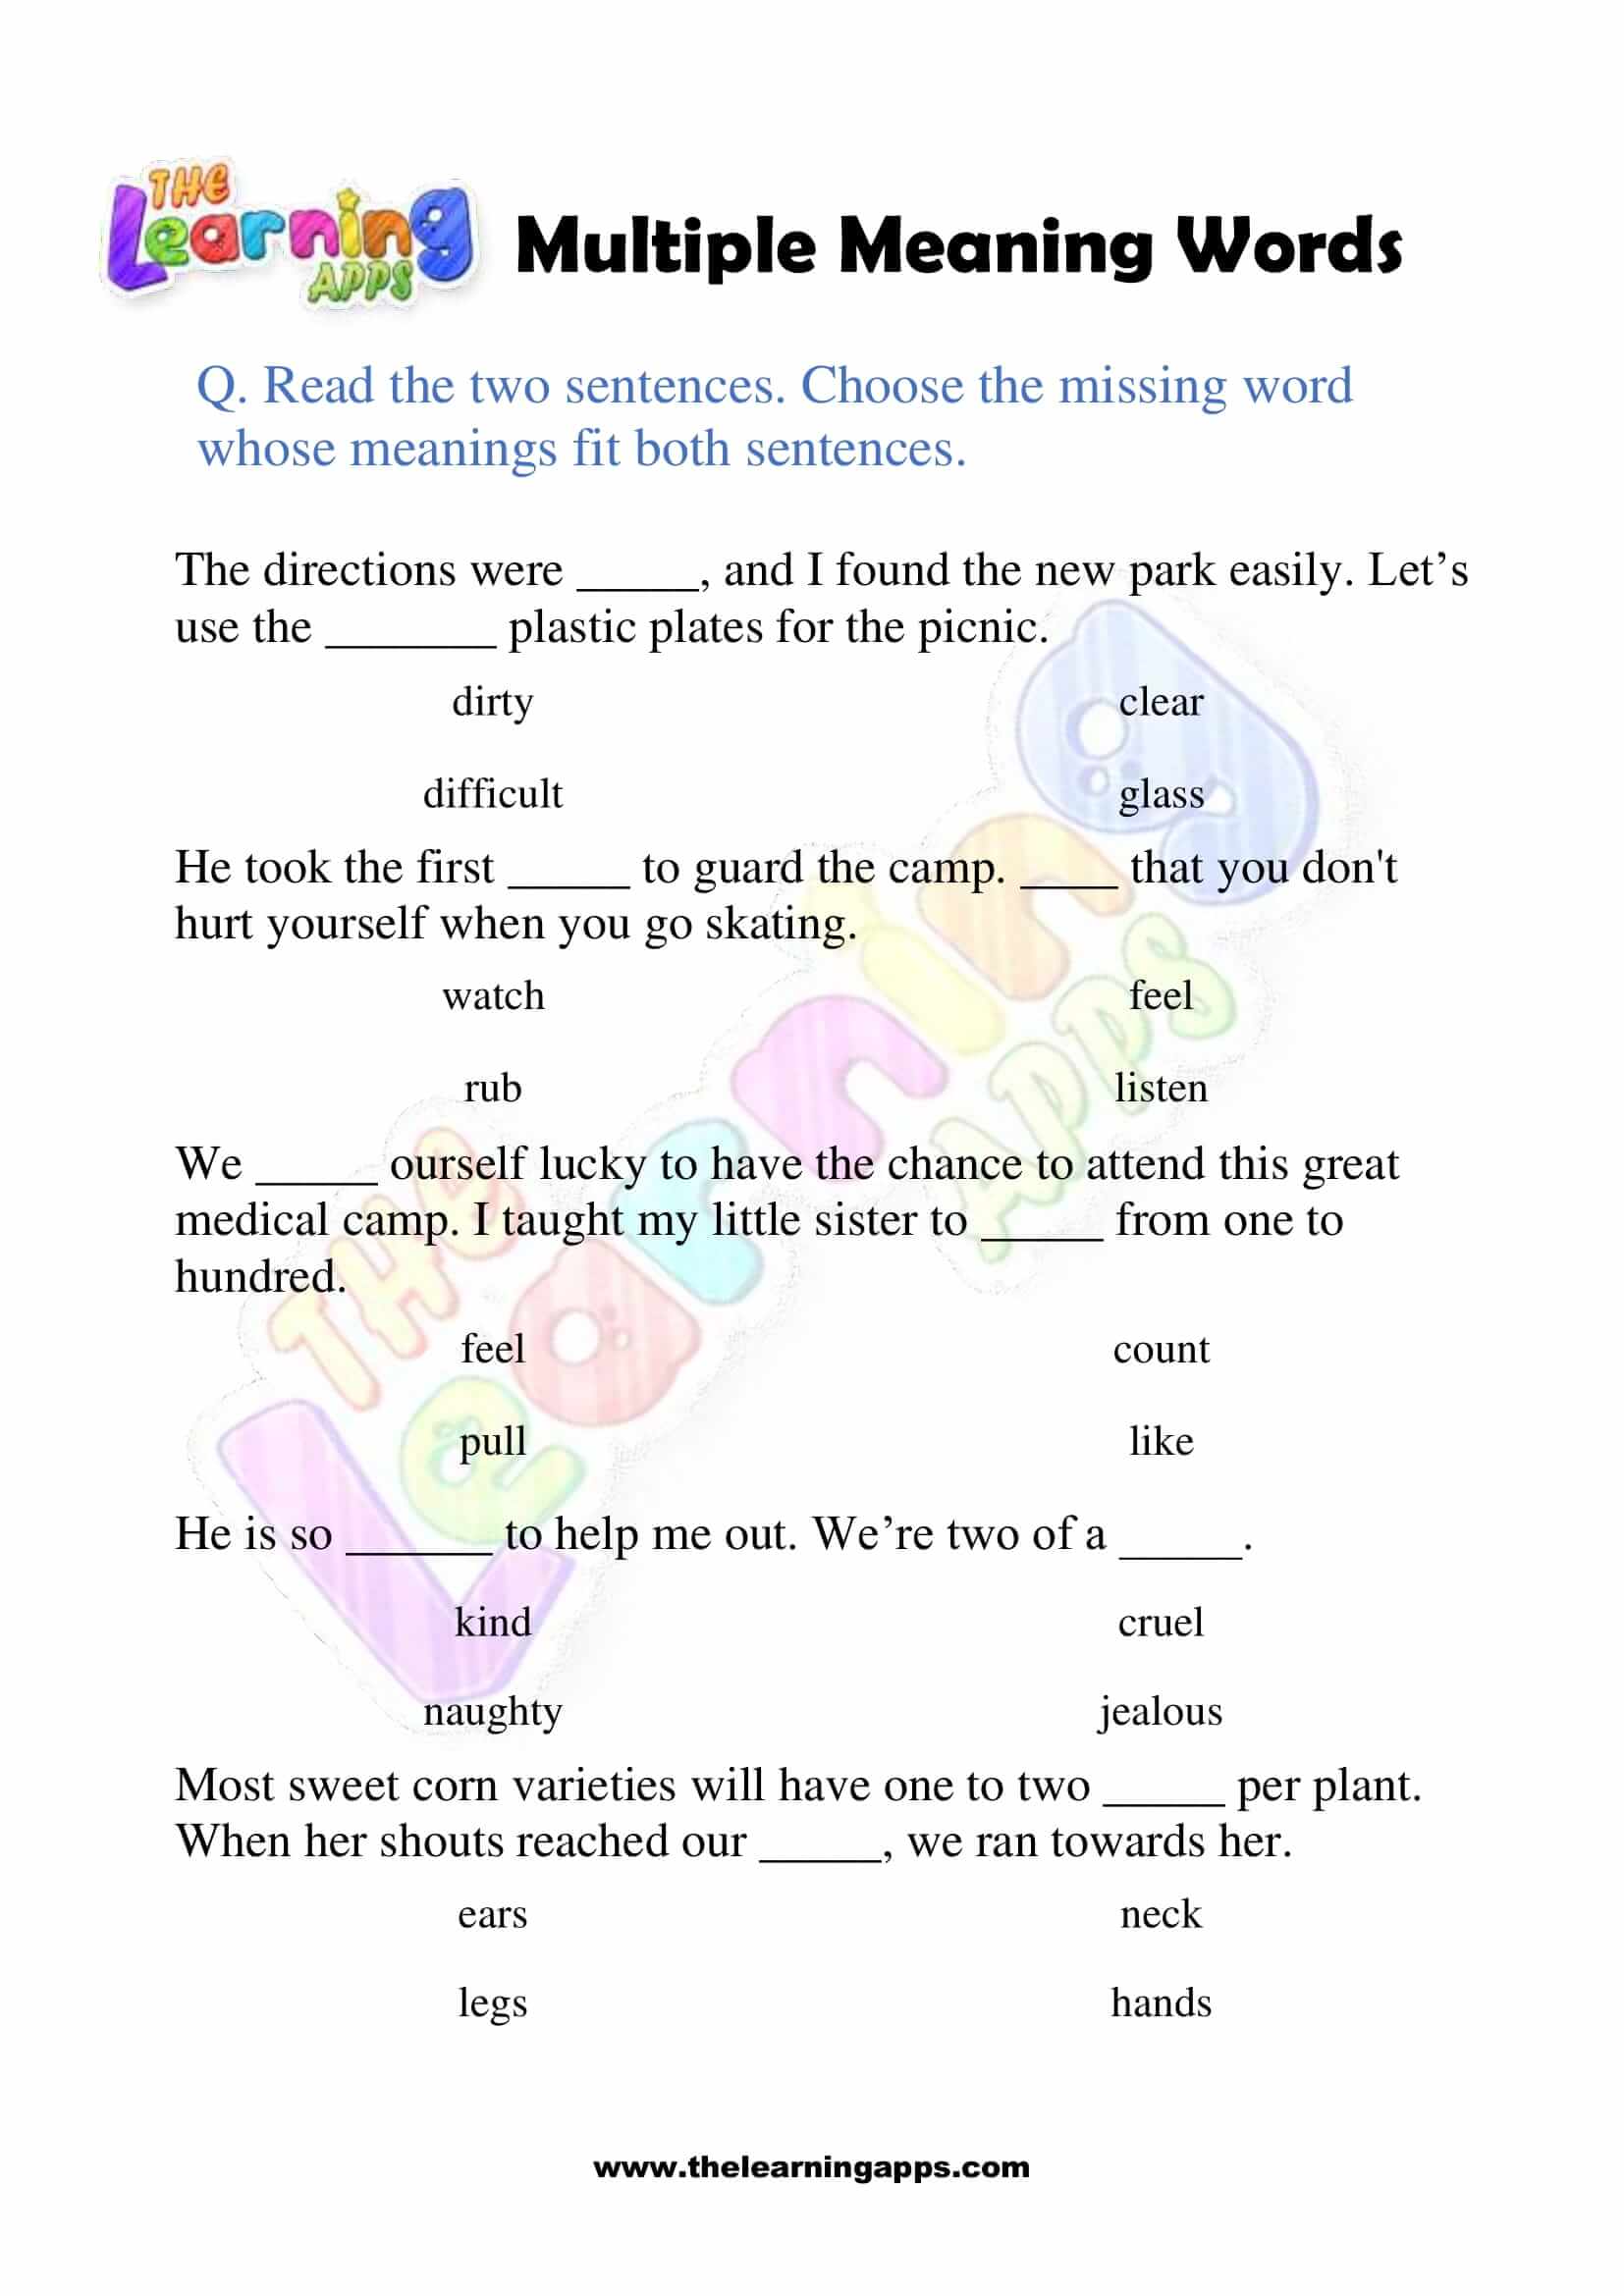 Multiple Meaning Words - Grade 3 - Activity 4